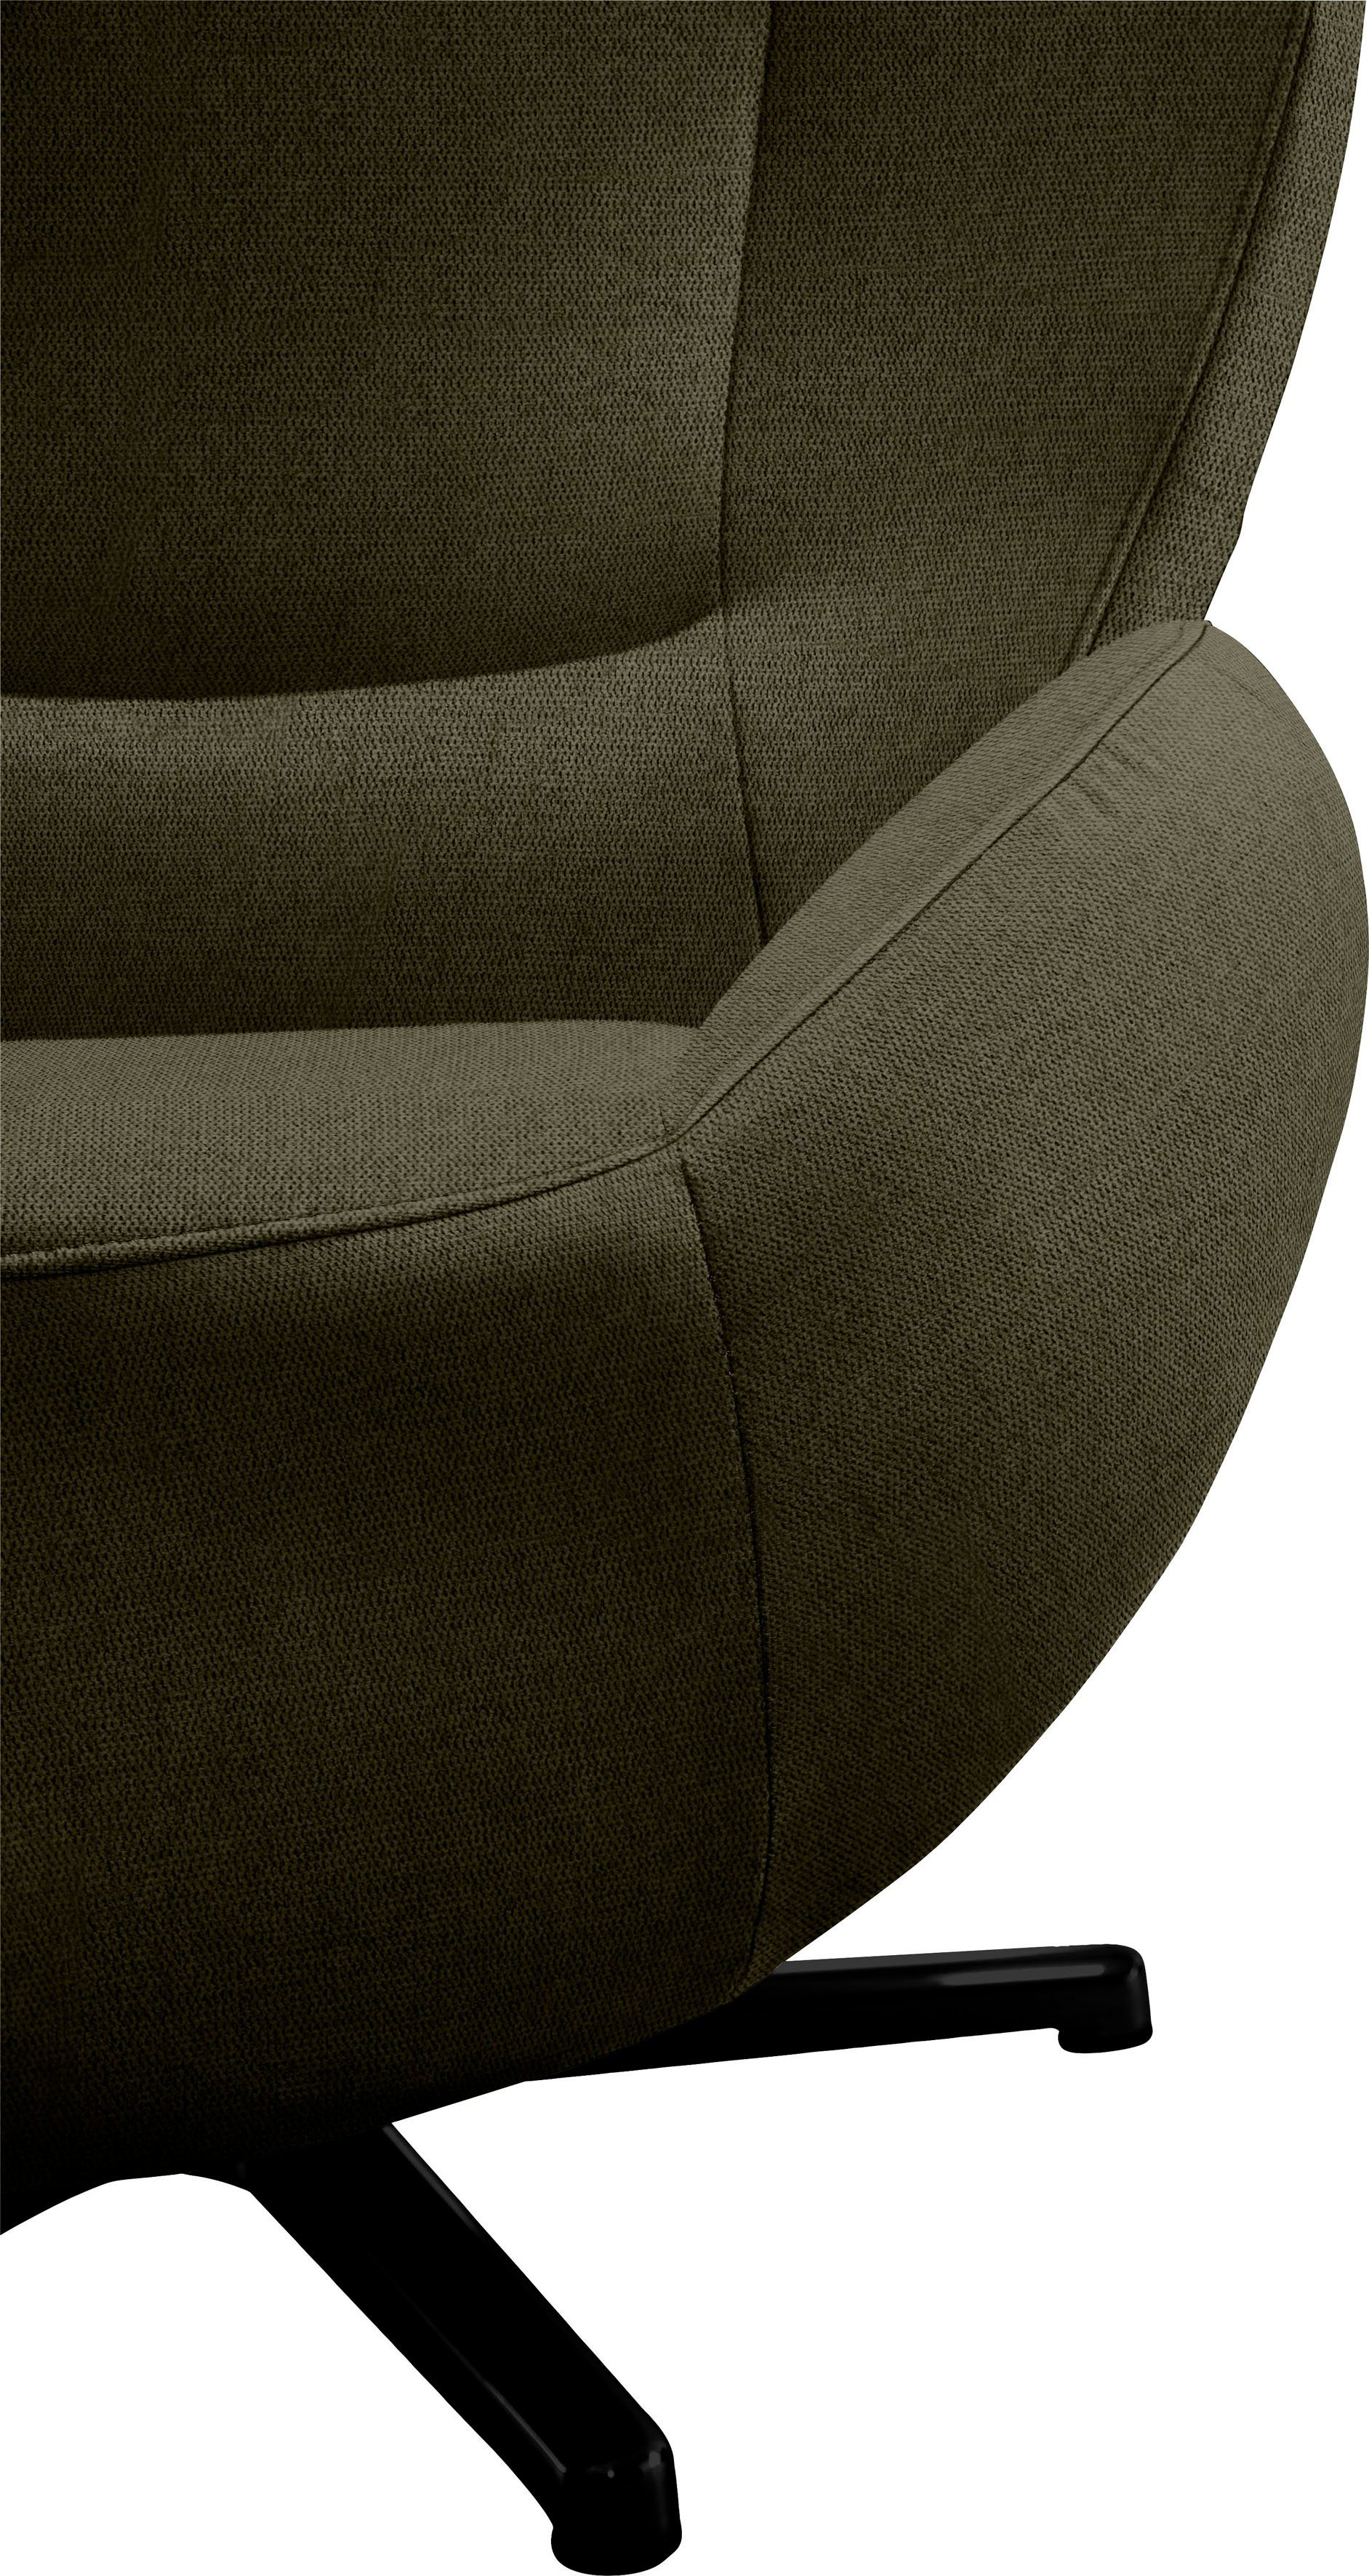 Metall-Drehfuß TOM TOM mit in PURE, Loungesessel Schwarz TAILOR HOME